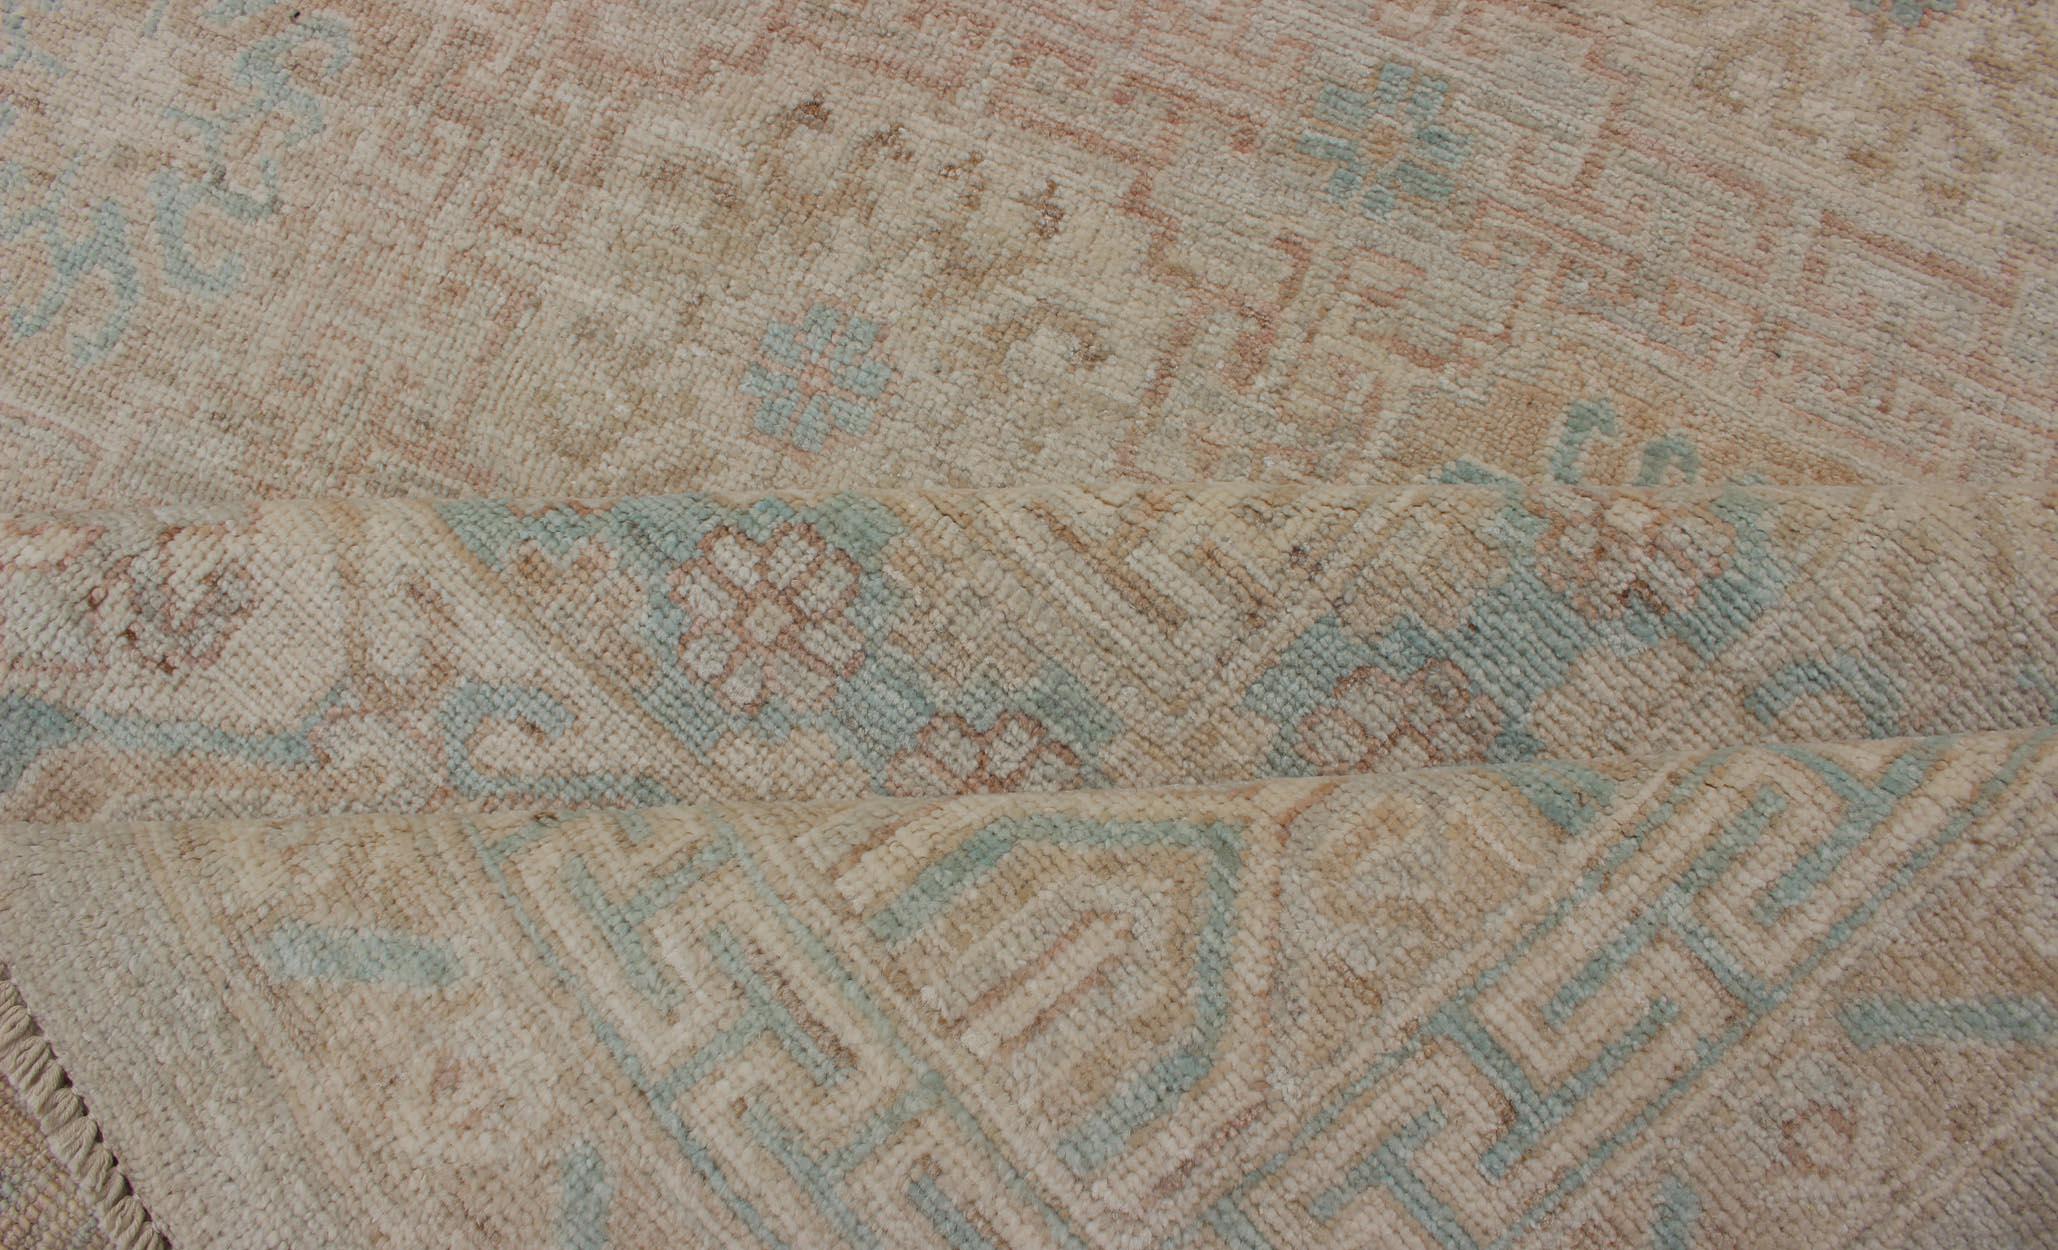 Khotan Design Rug with Geometric Medallions in Tan and Turquoise For Sale 4